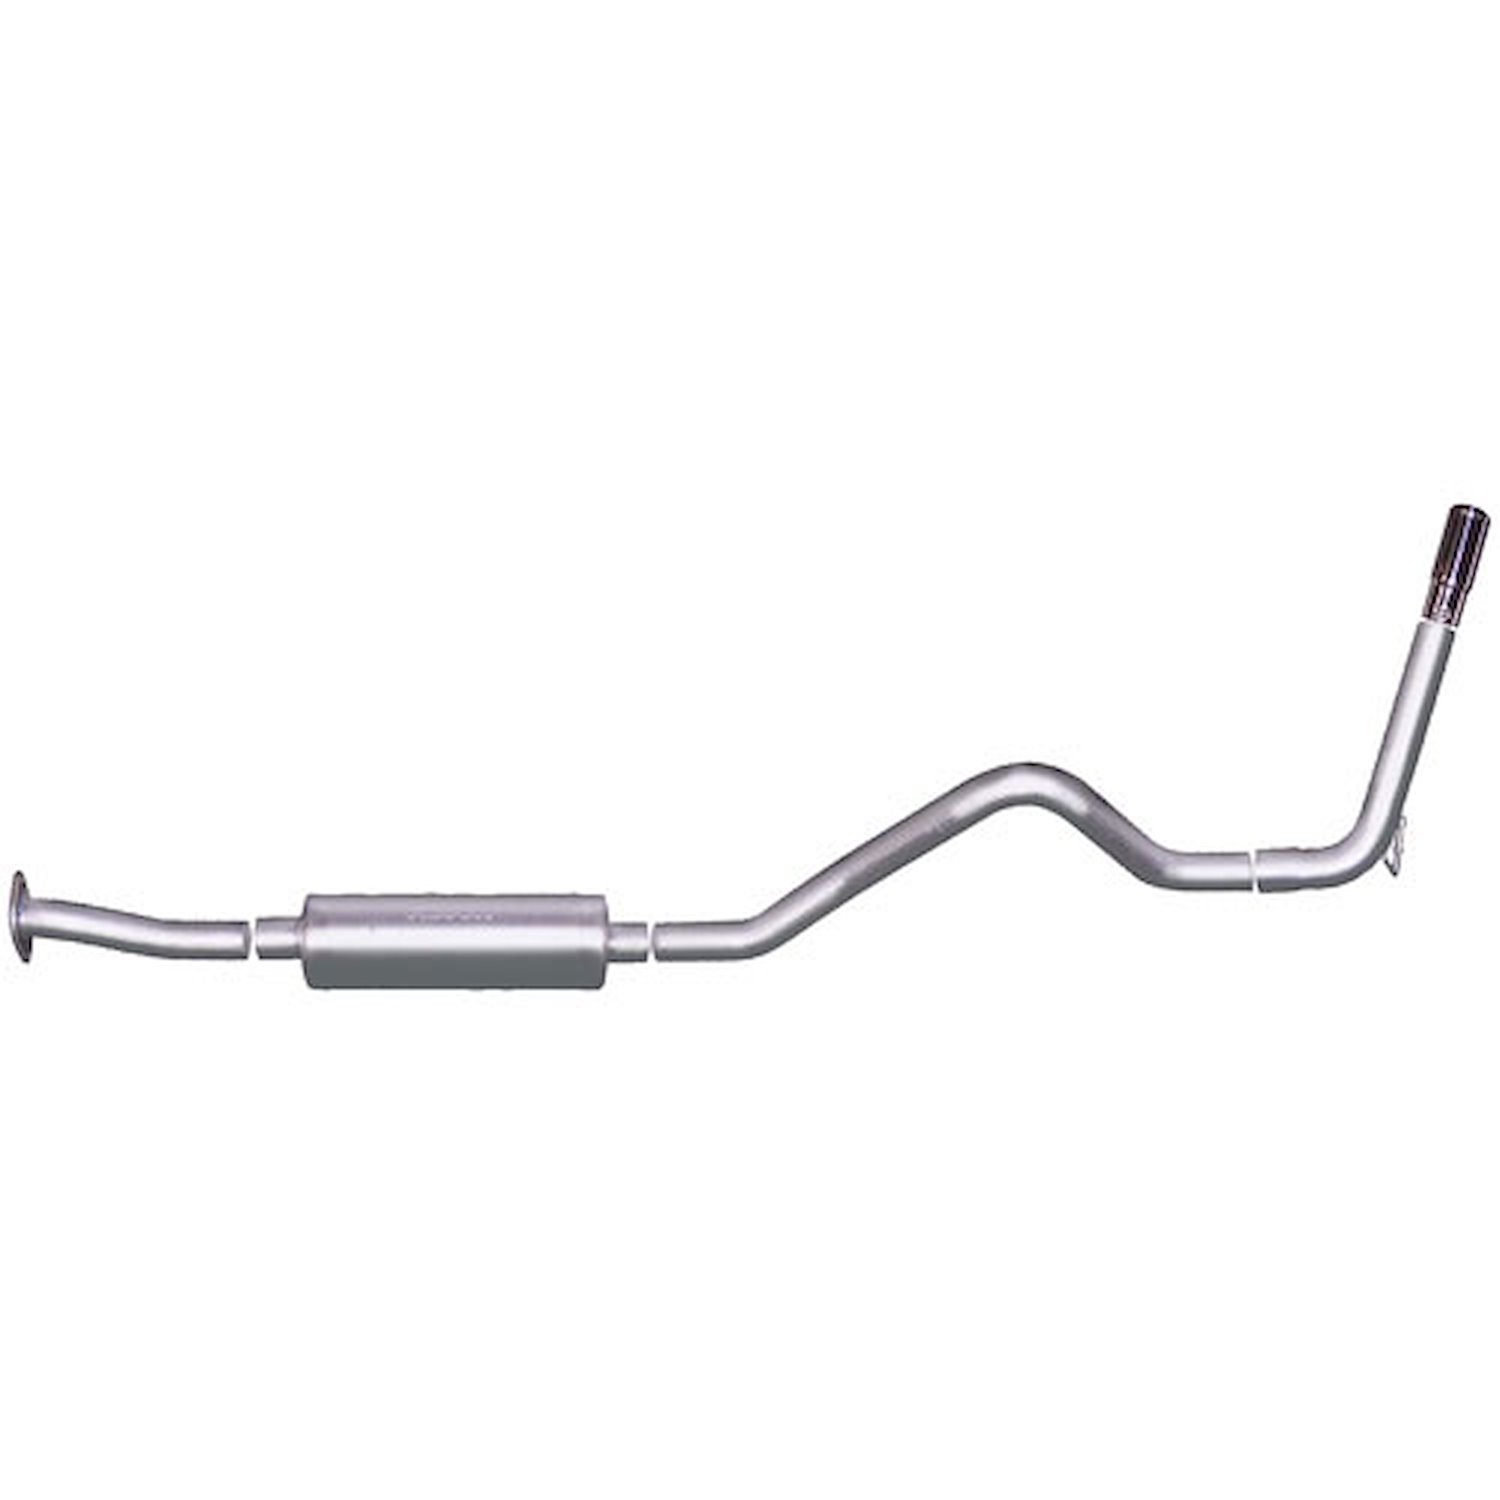 Swept-Side Cat-Back Exhaust 2000-03 Chevy S10/GMC Sonoma Xtreme 4.3L